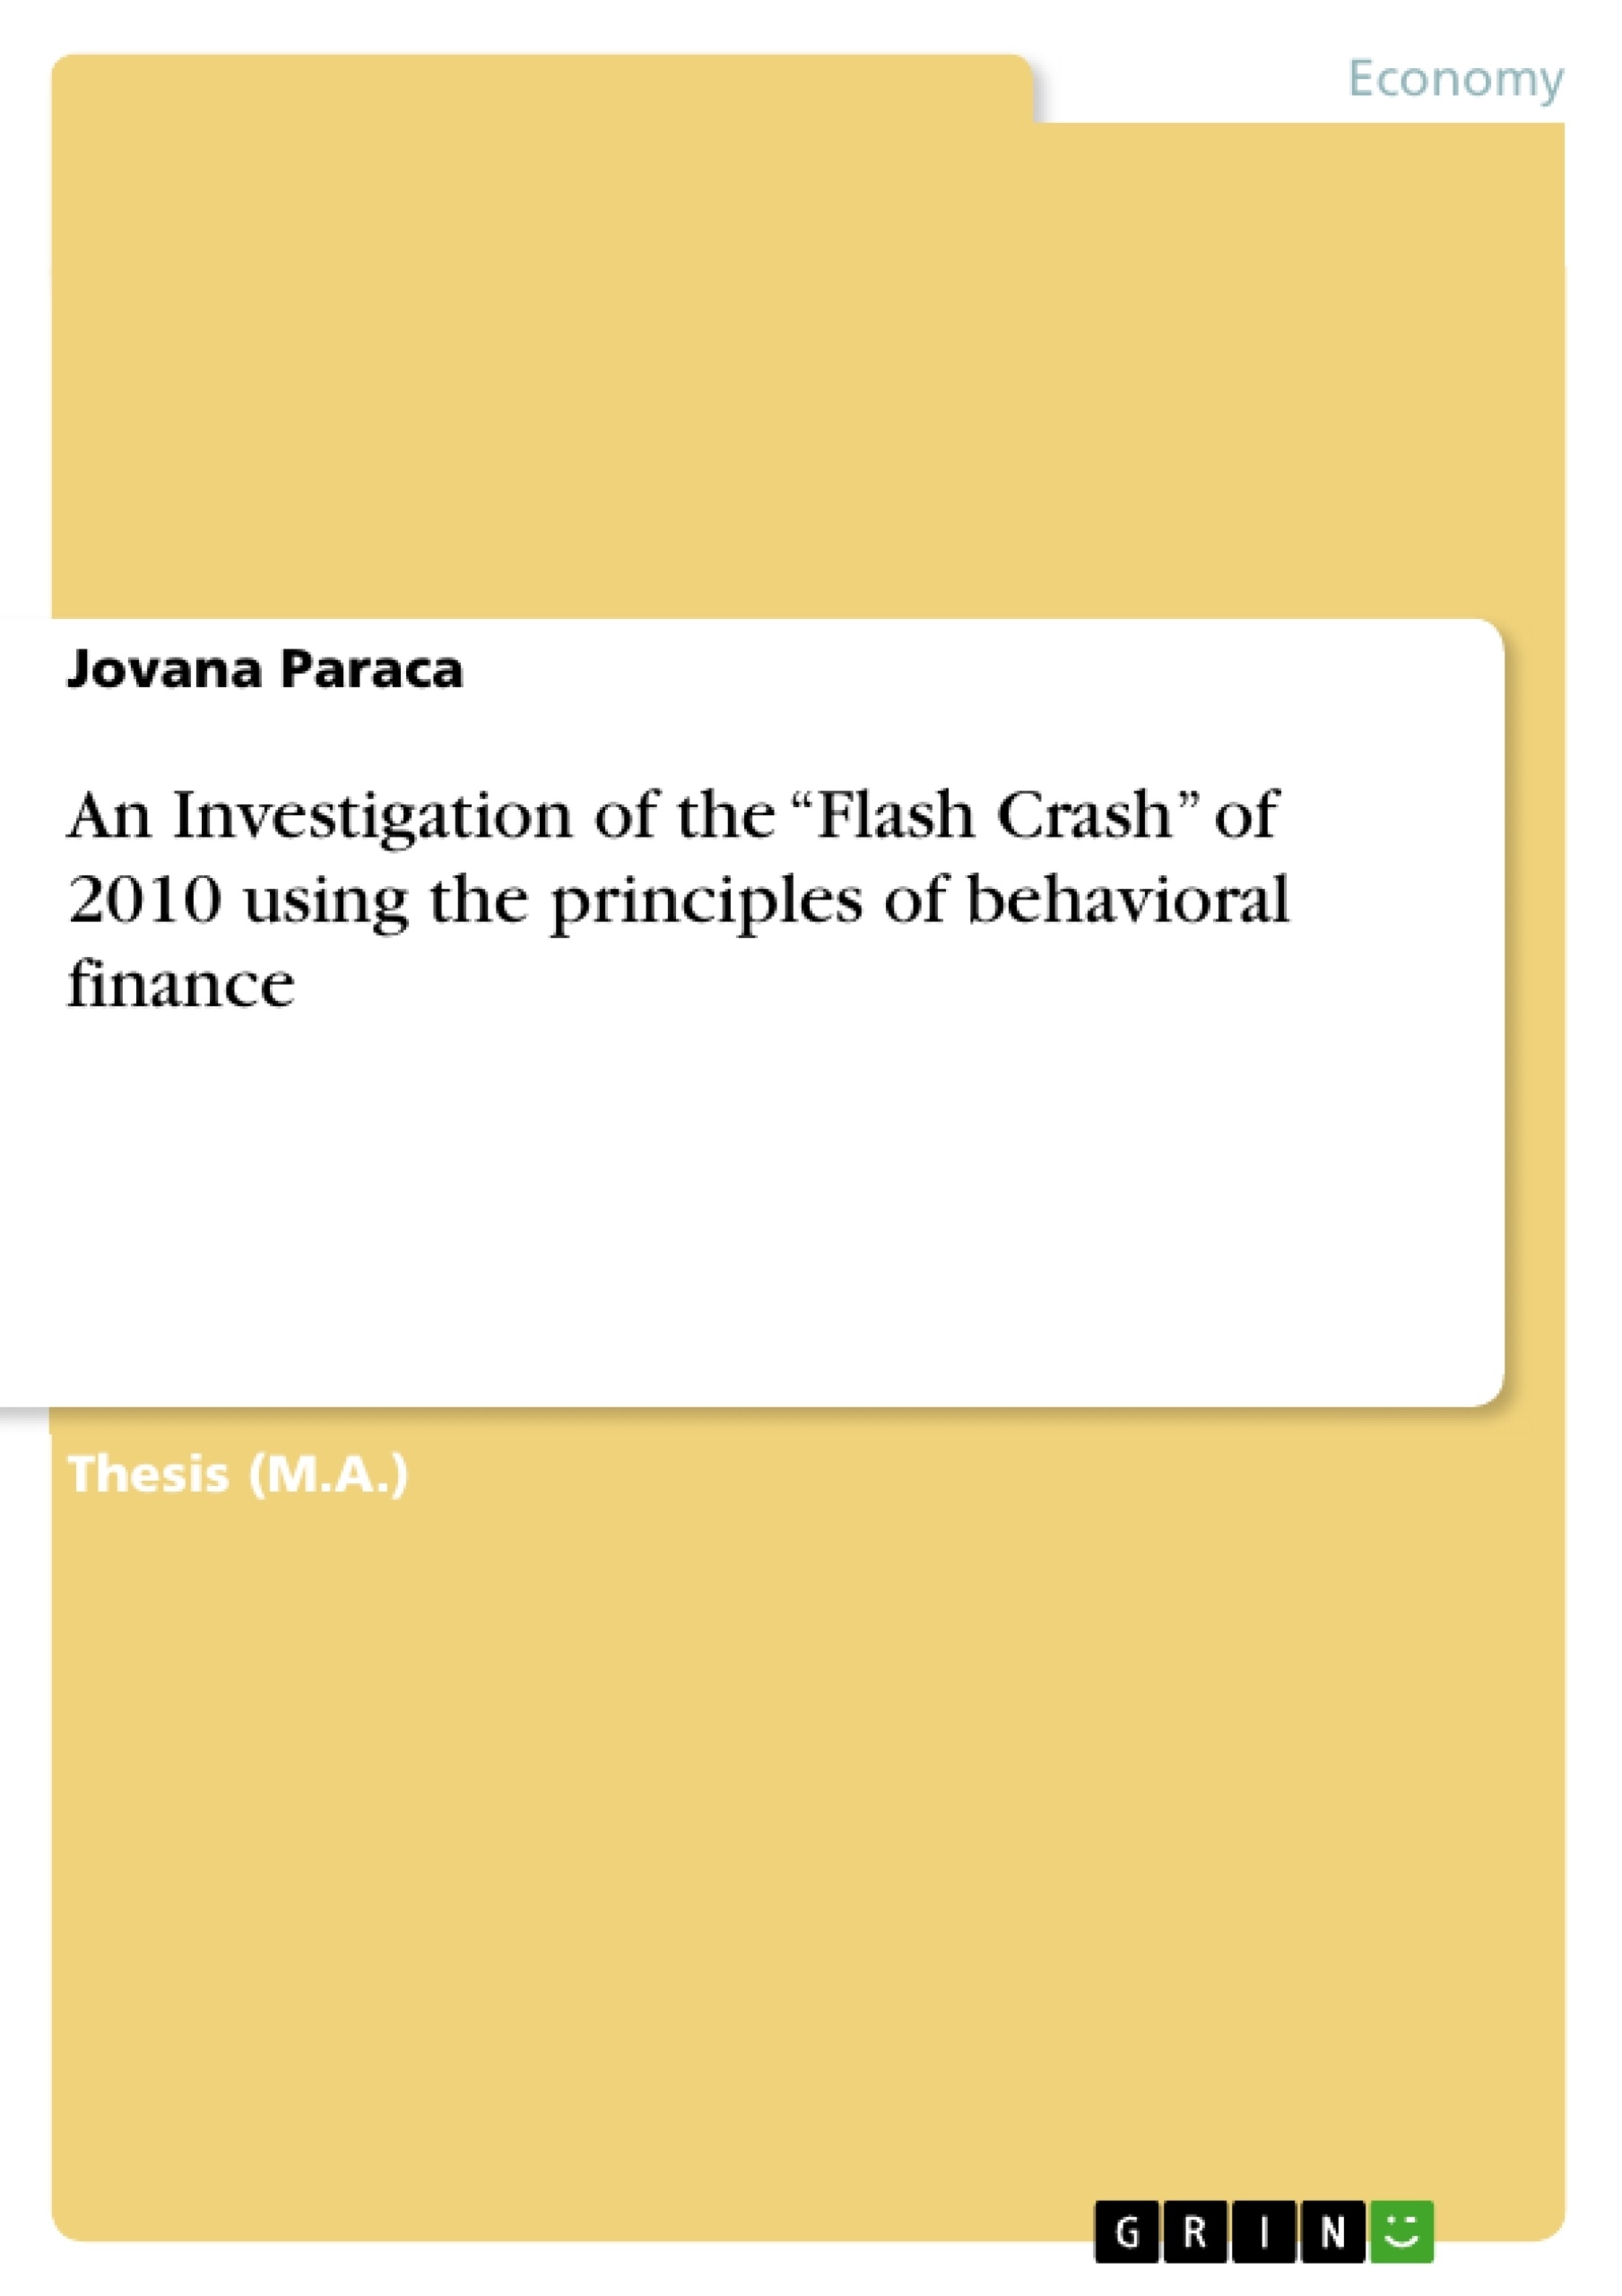 Titre: An Investigation of the “Flash Crash” of 2010 using the principles of behavioral finance